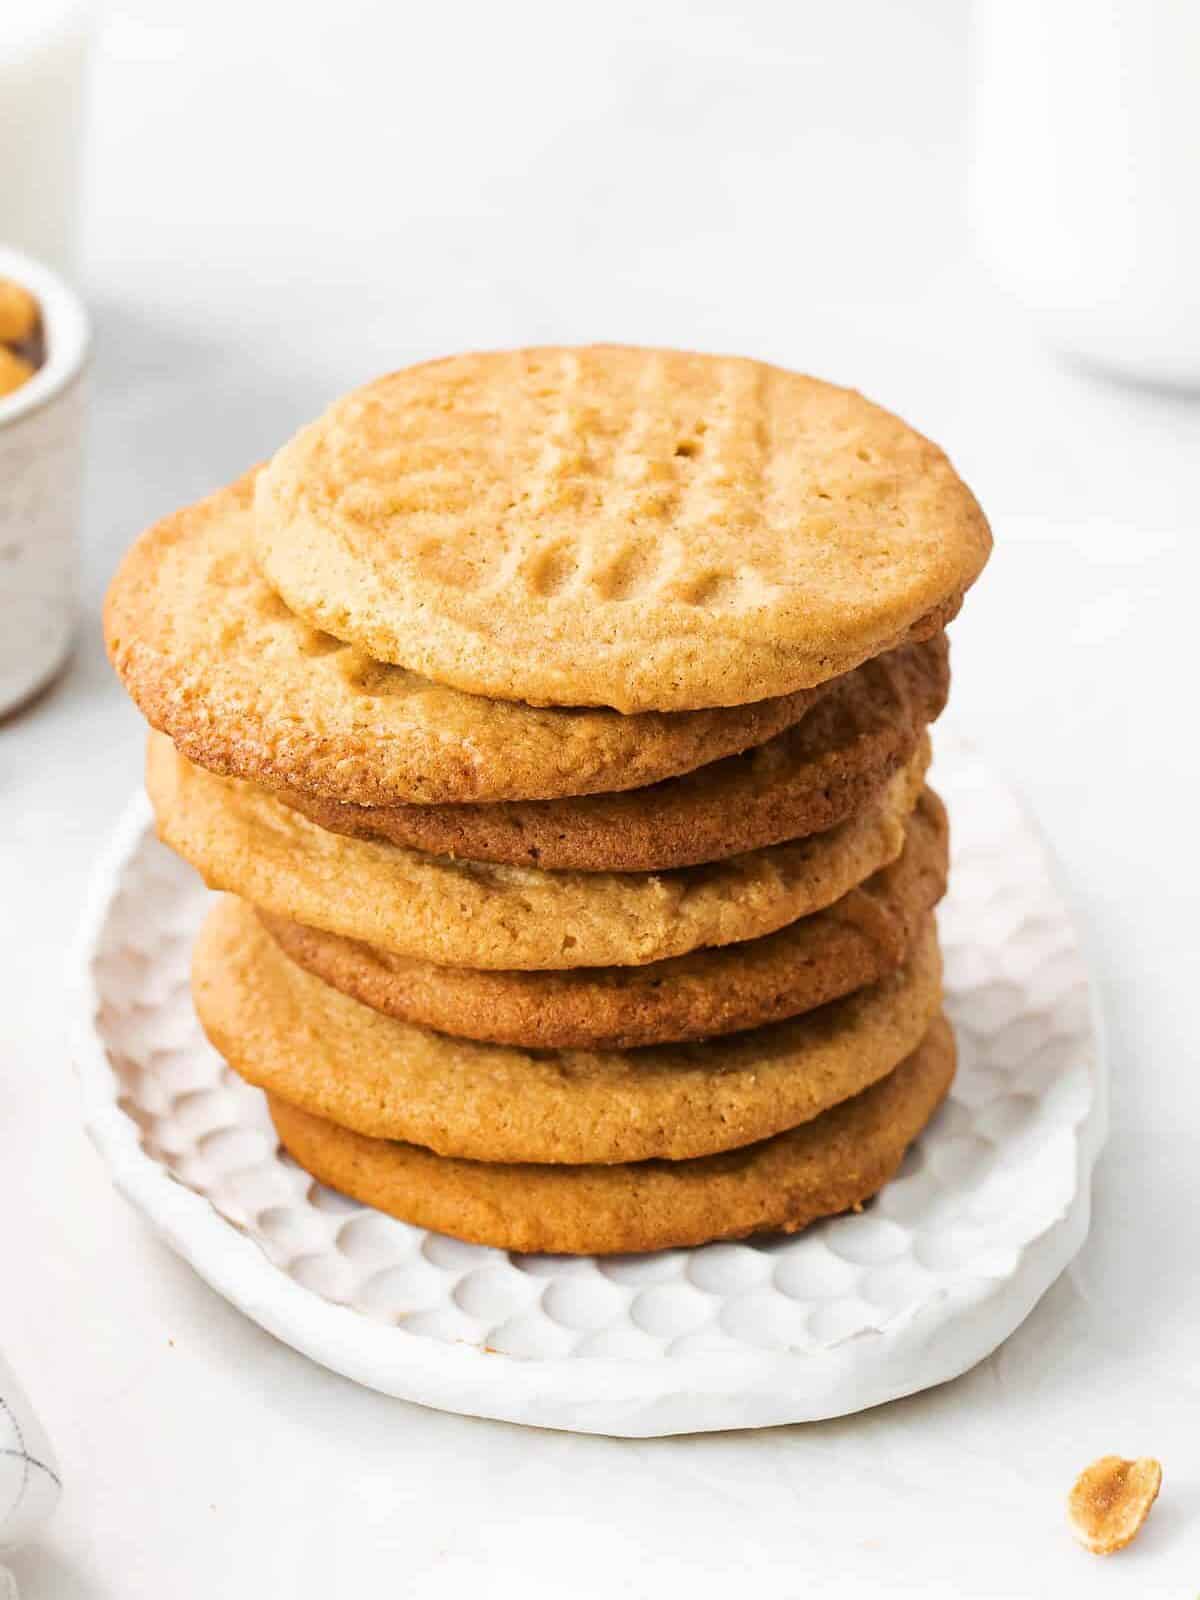 side view of 7 brown butter peanut butter cookies stacked on a white plate.